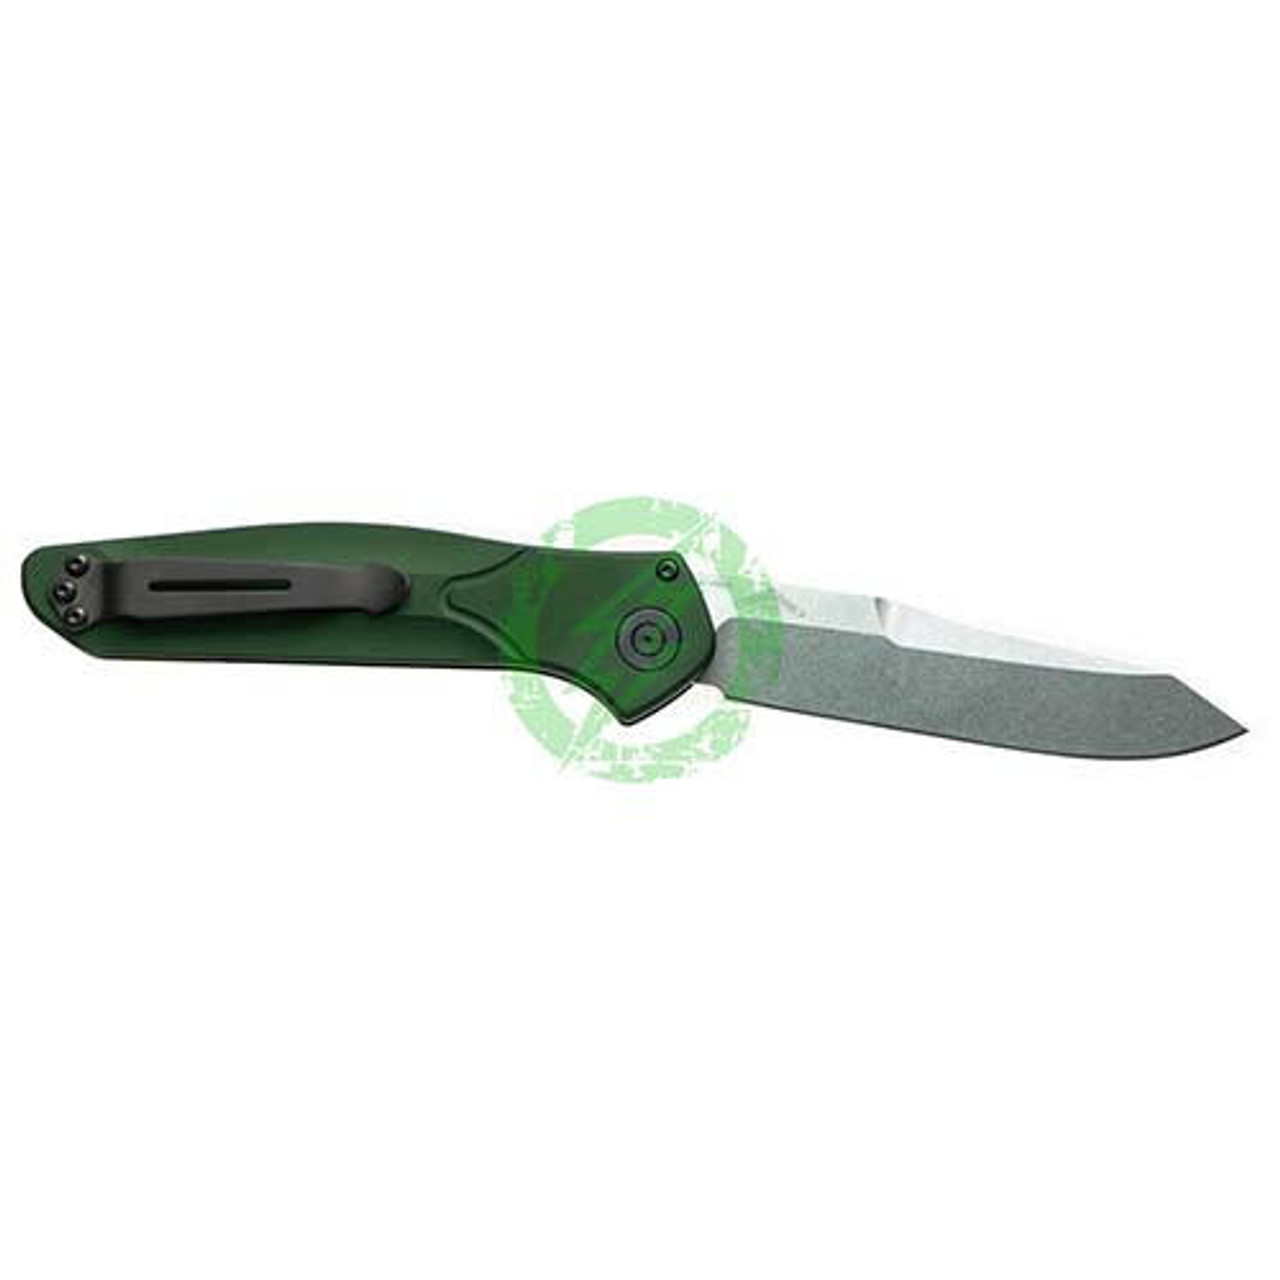  Benchmade Auto Osborne Reverse Tanto Green Anodized, 6061-T6 Billet Aluminum with Stainless Steel Liners Handle 